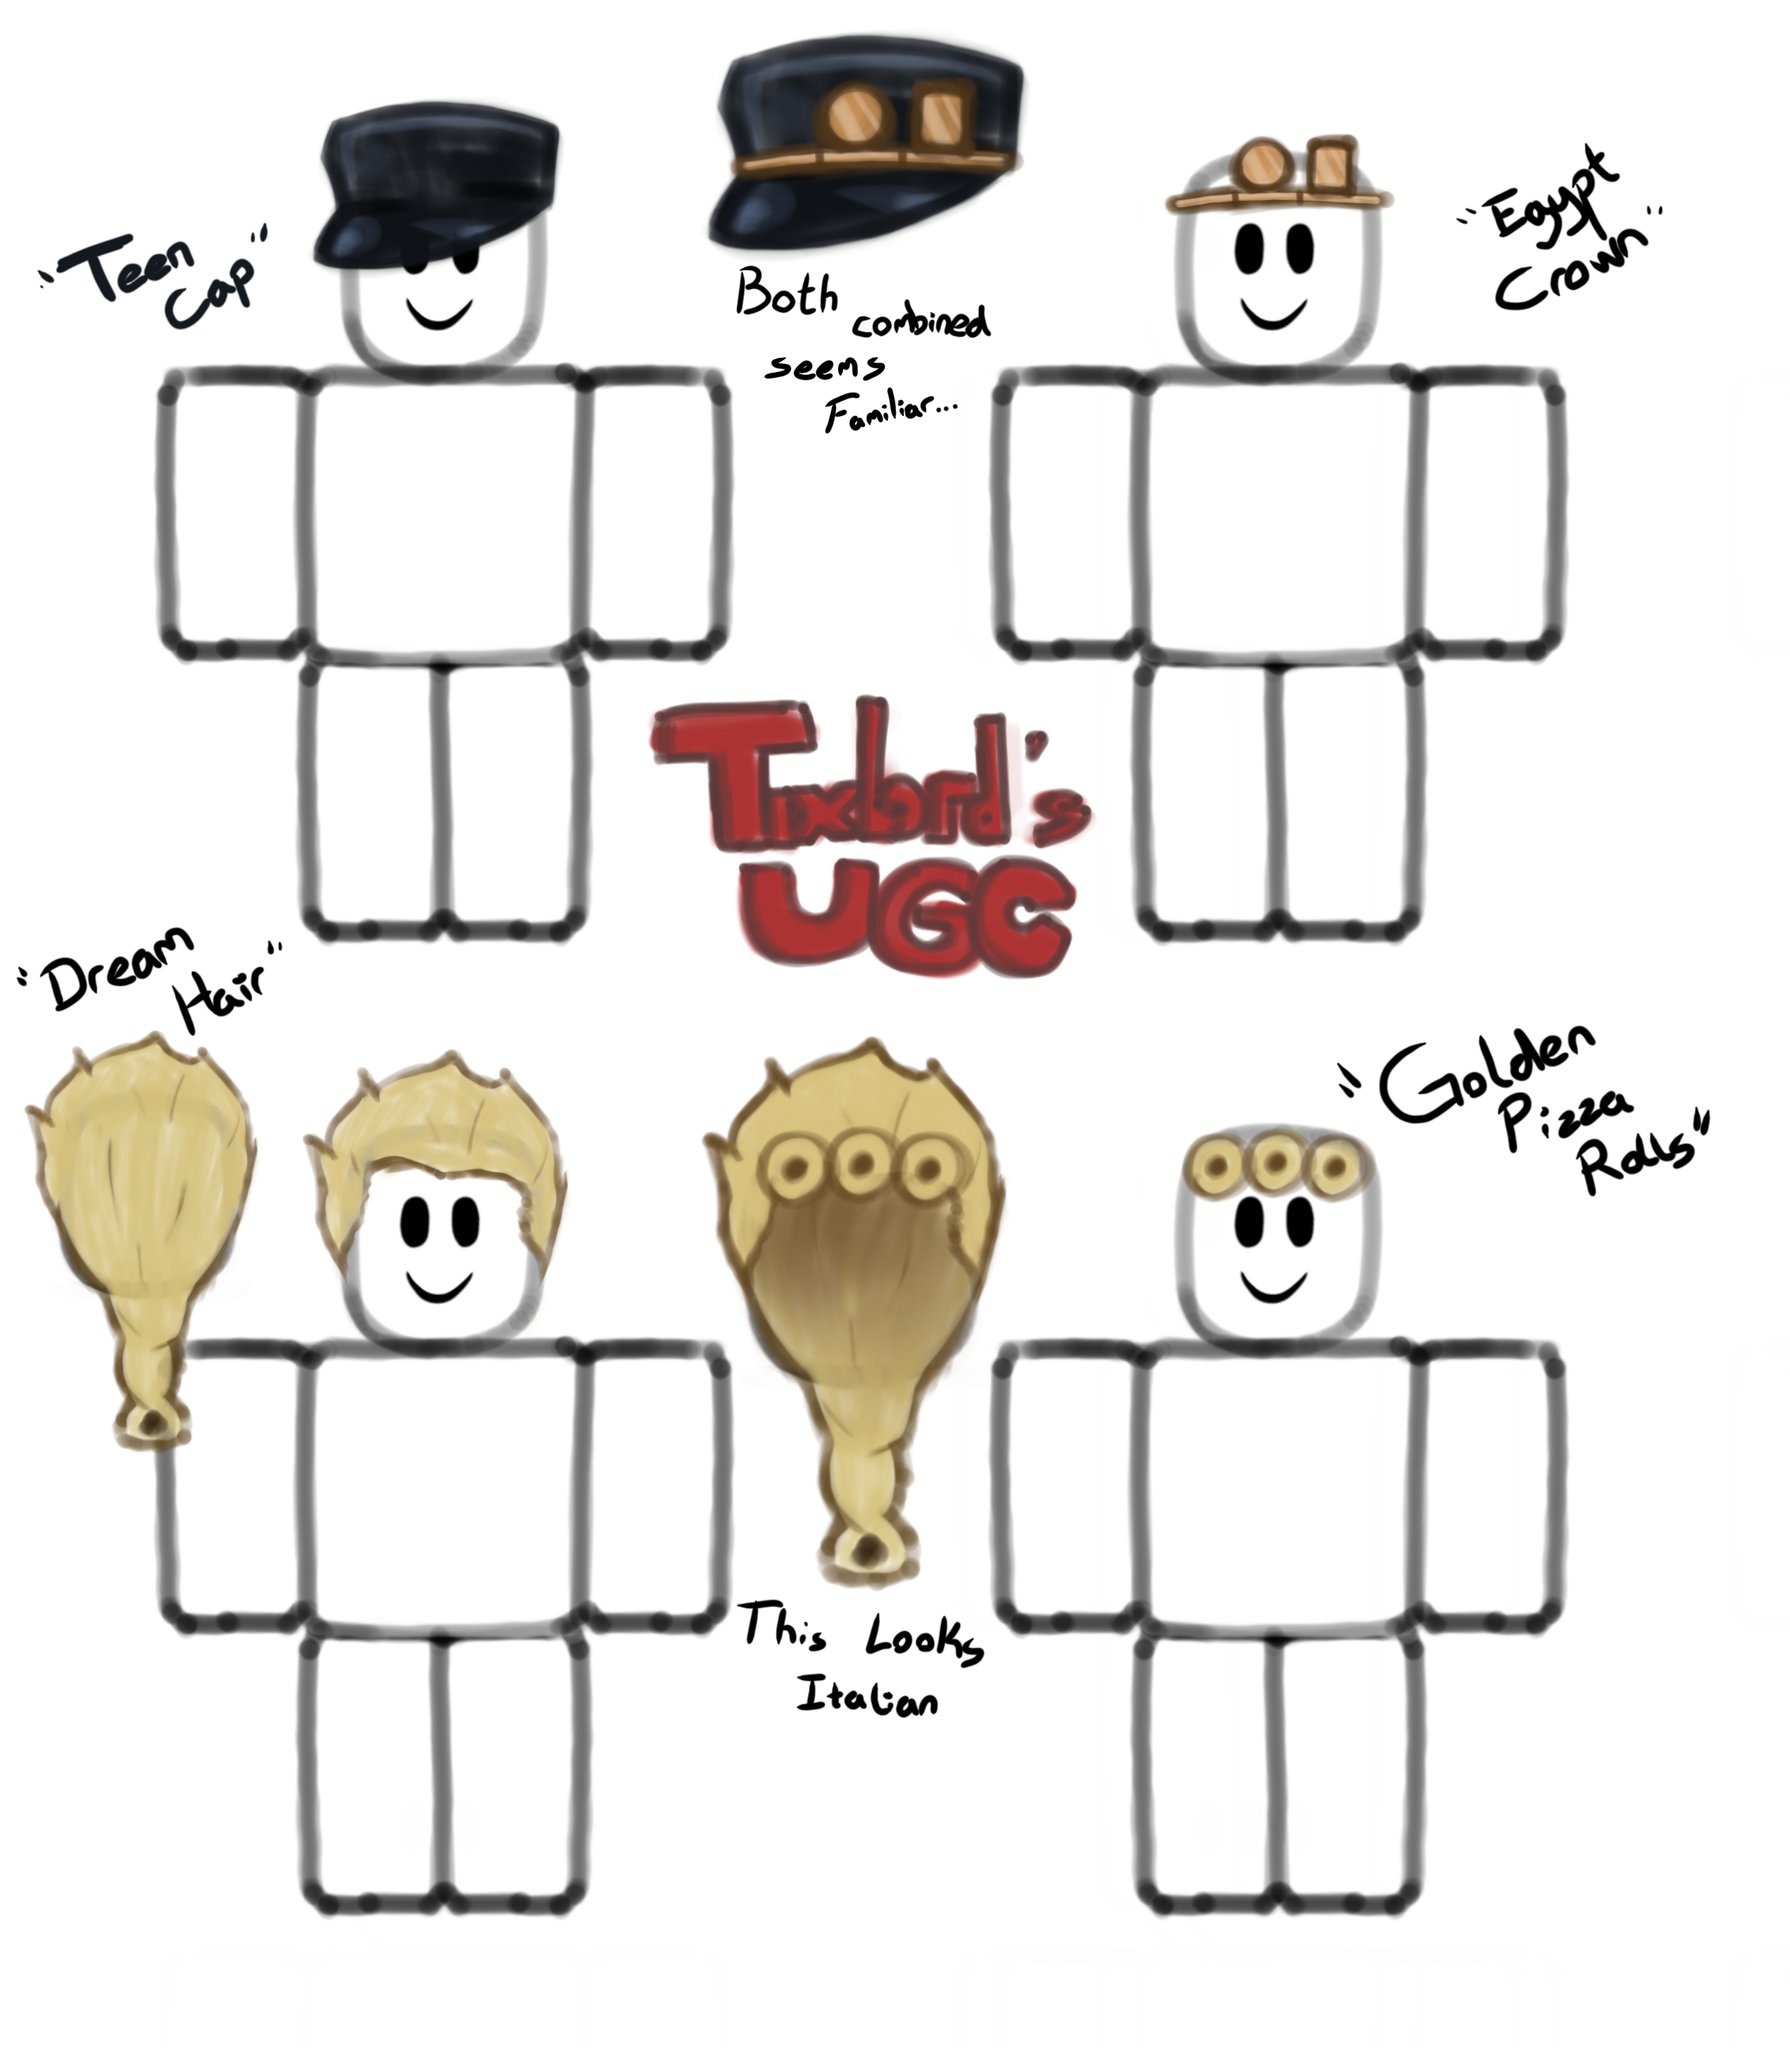 Tixlord On Twitter New Ugc Concepts Robloxugc - roblox got talent twitter rxgate cf